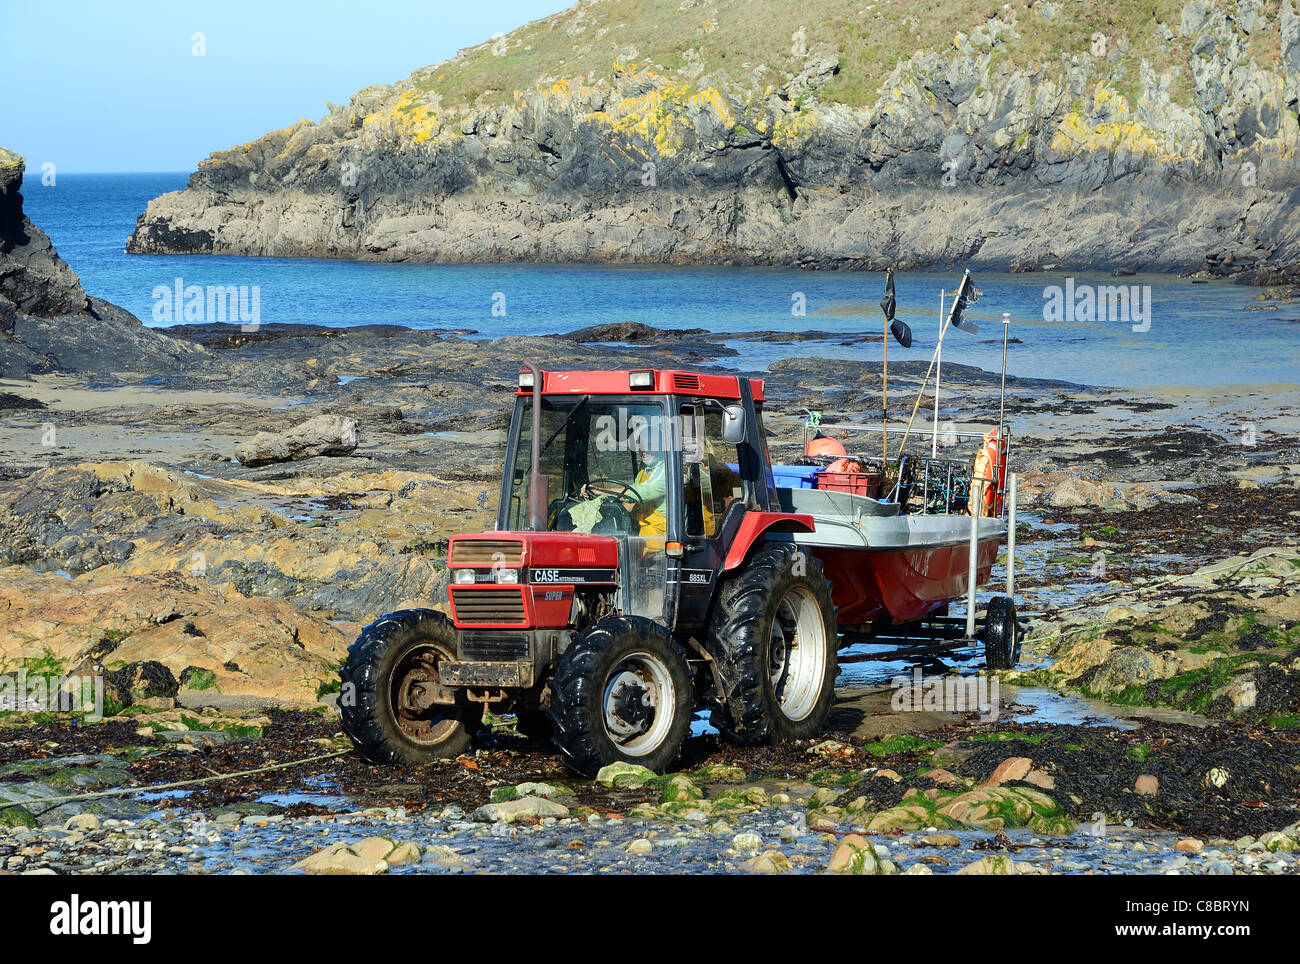 A fisherman using a tractor to move his boat on the rocky beach at port quin in north cornwall, uk Stock Photo